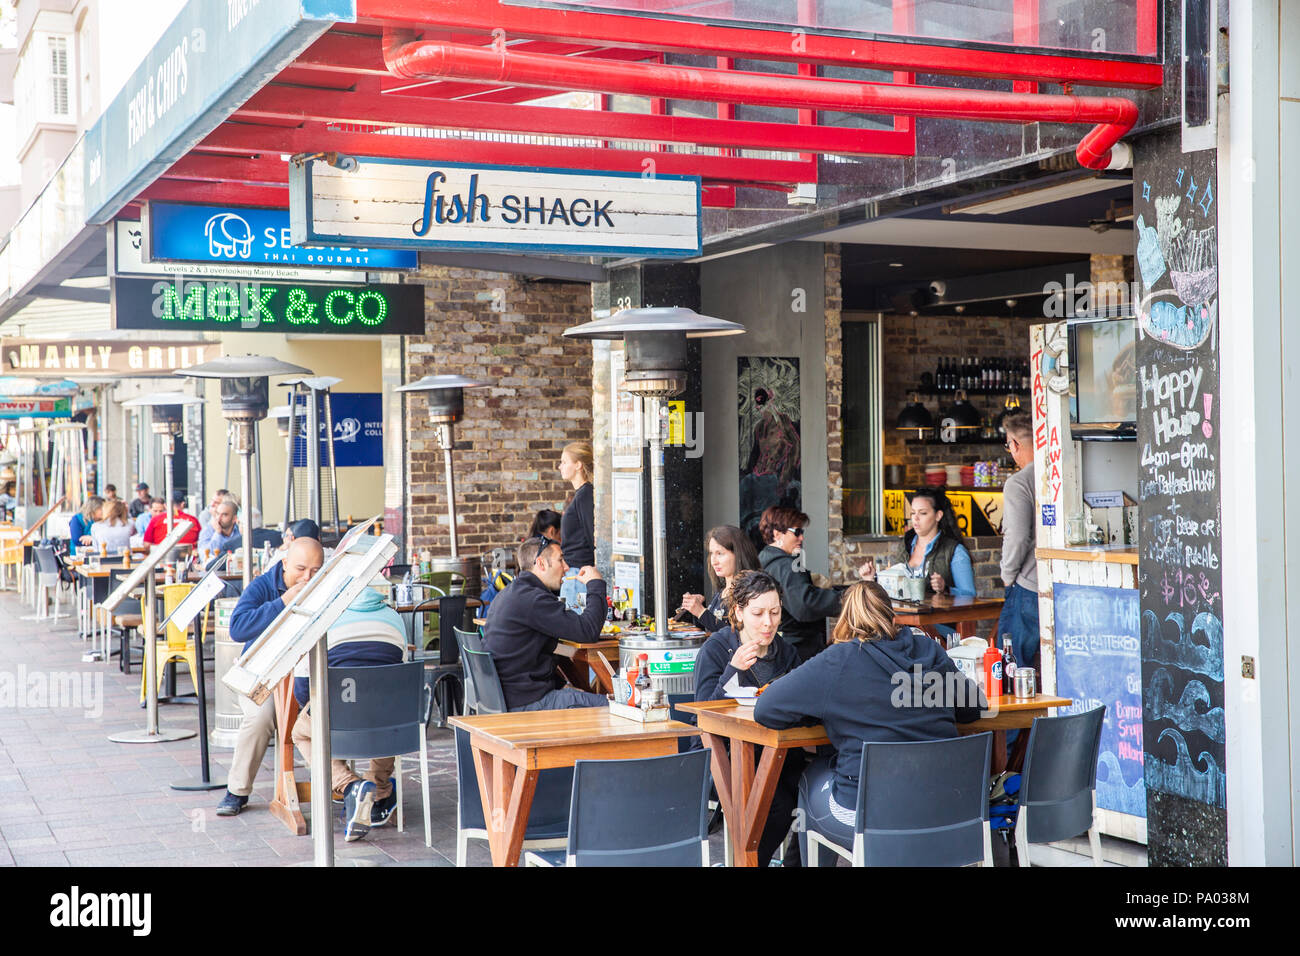 Restaurants and cafes in Manly beach, Sydney,Australia Stock Photo